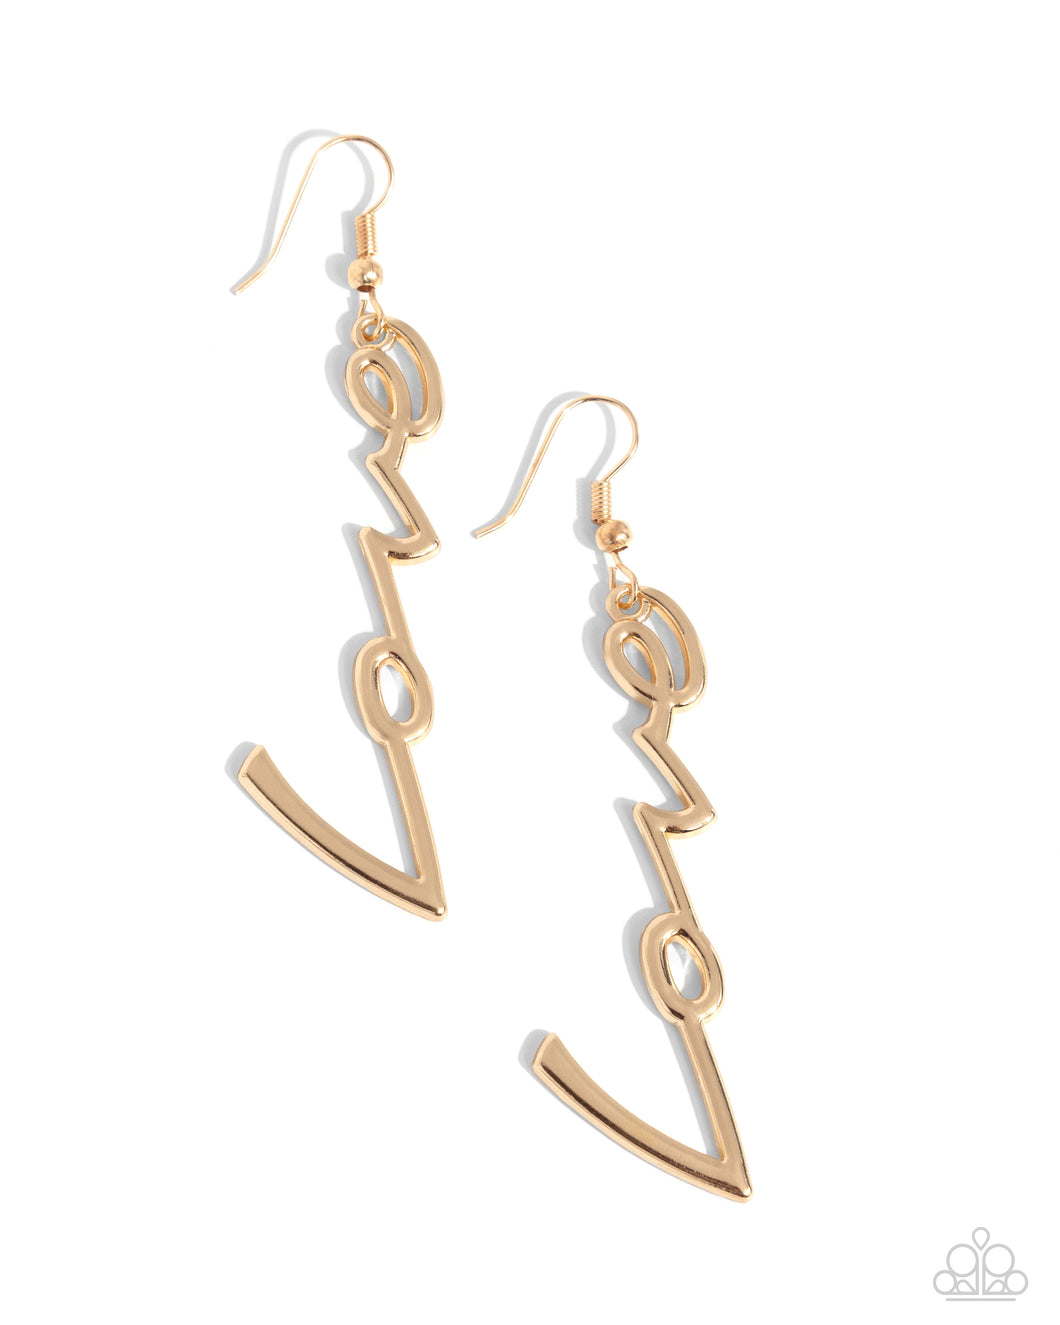 Paparazzi Earrings Light-Catching Letters - Gold Coming Soon